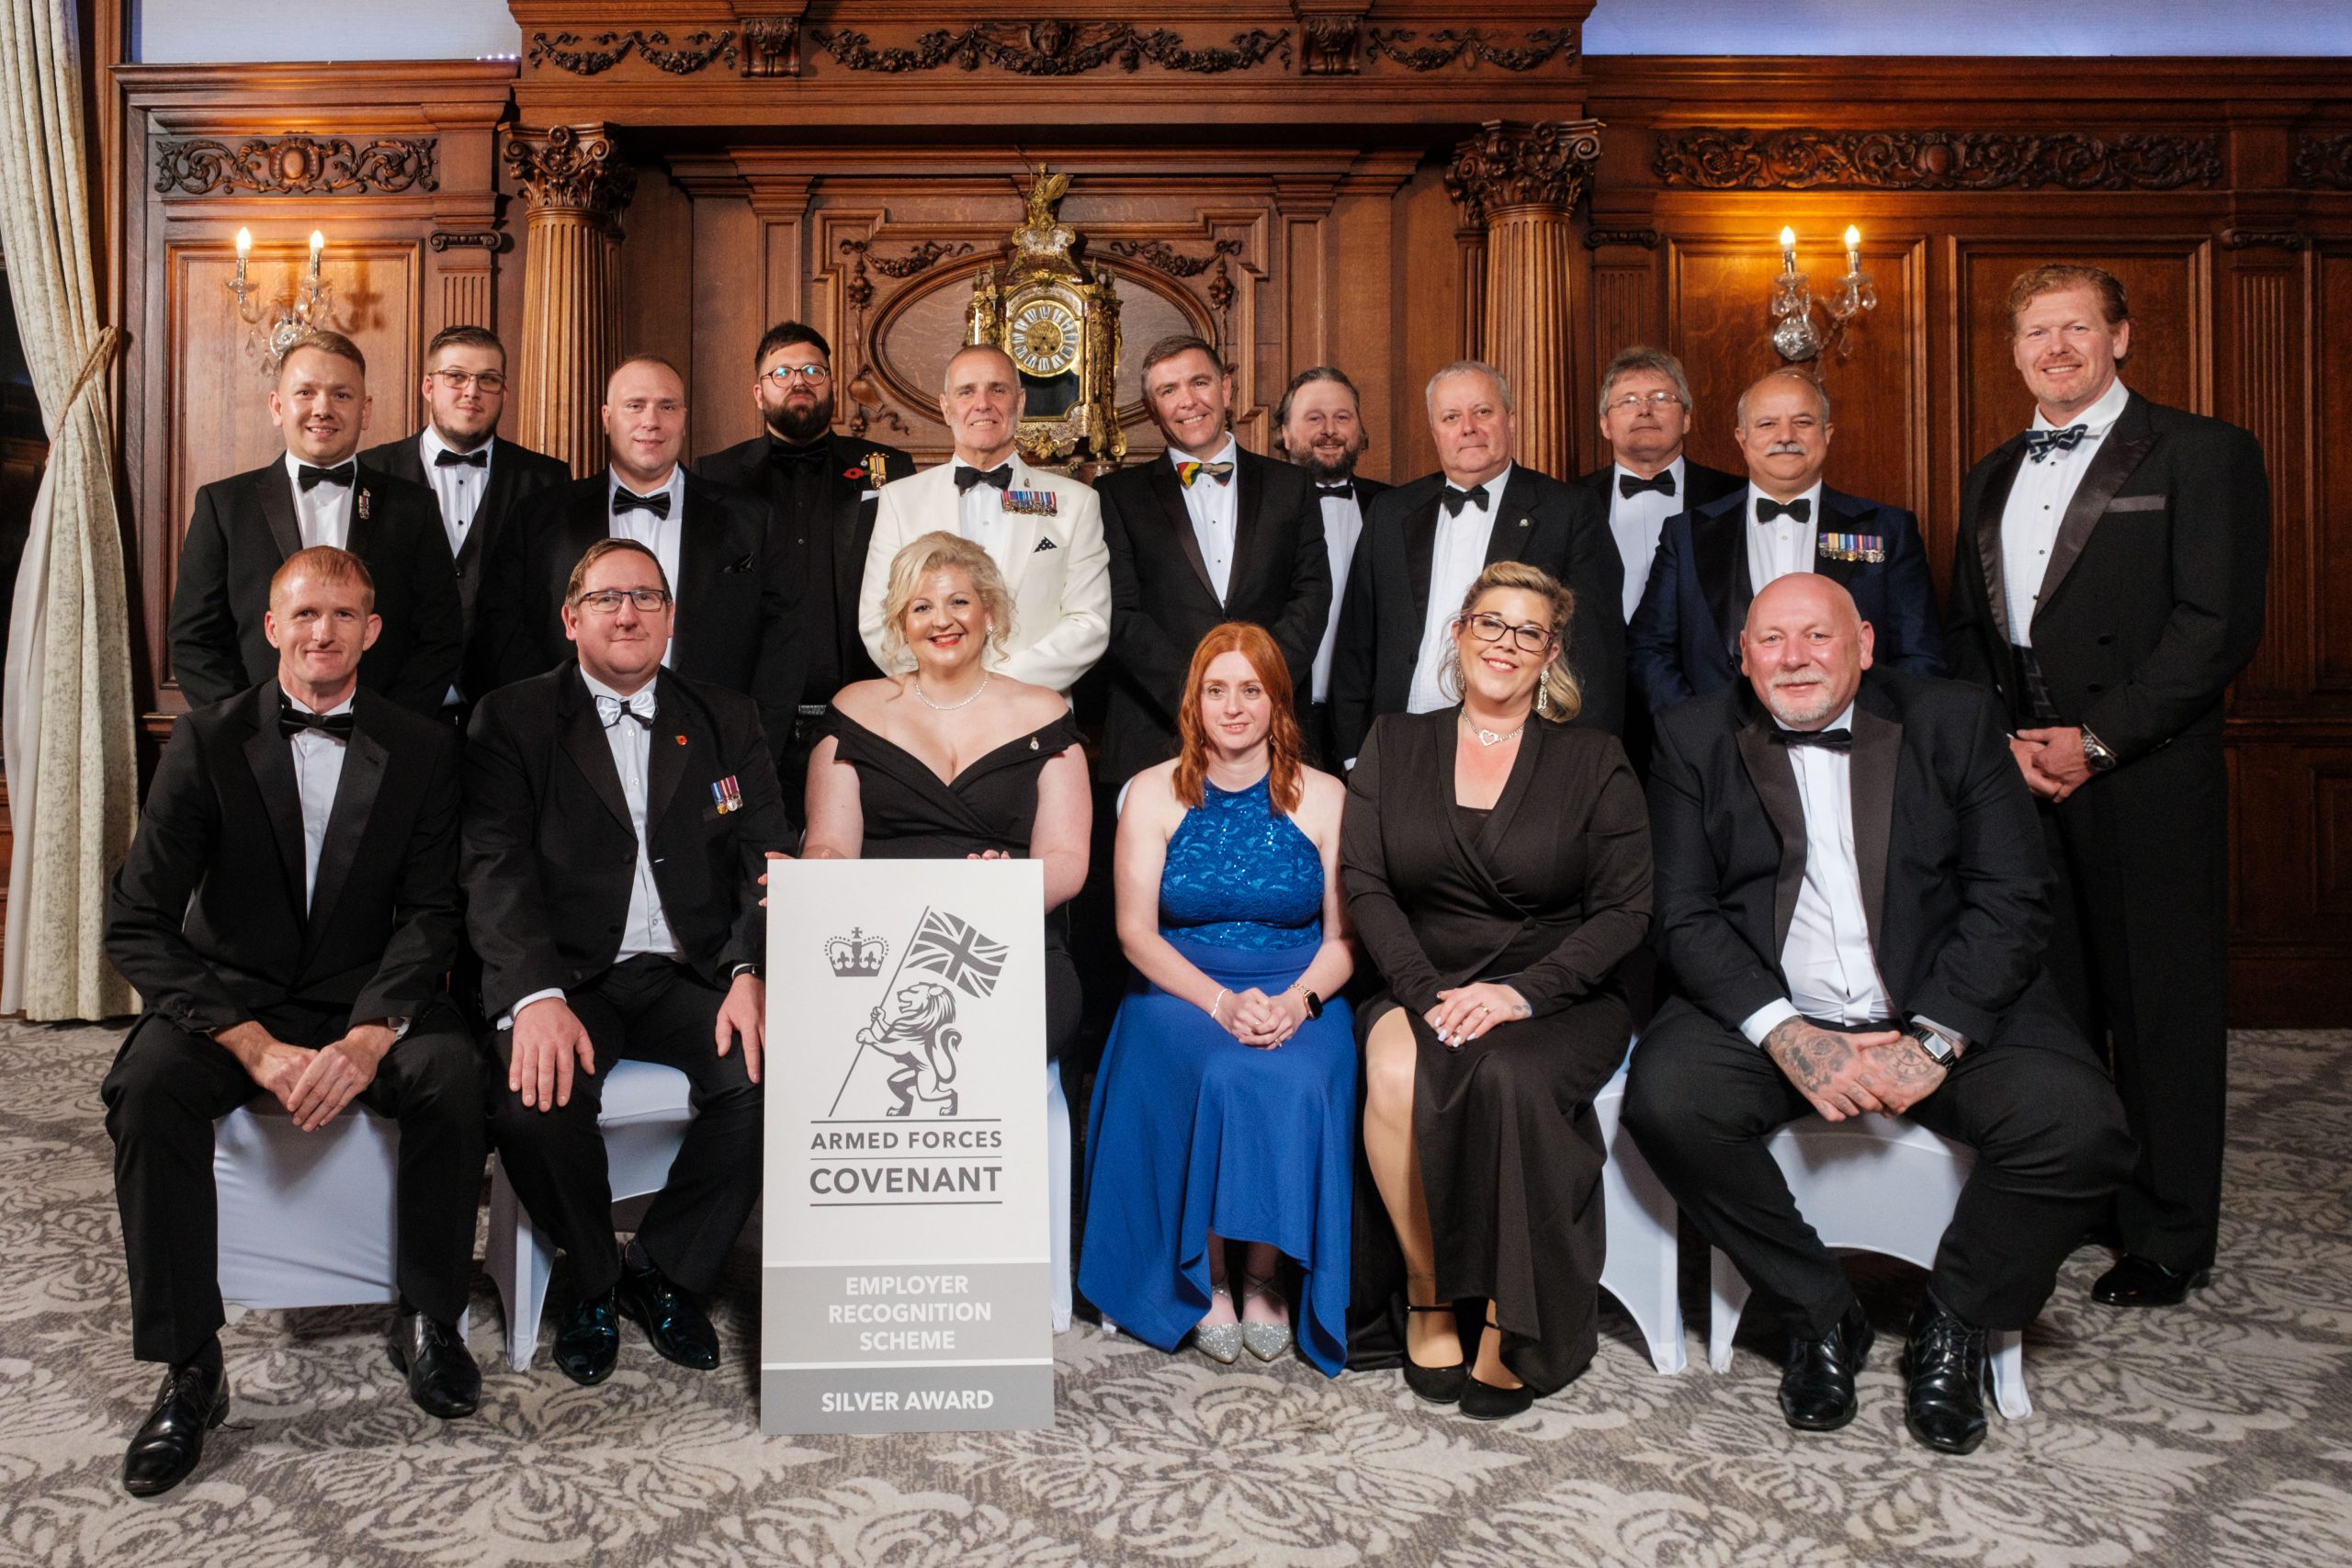 All of the 2021 Silver Employer Recognition Scheme award winners